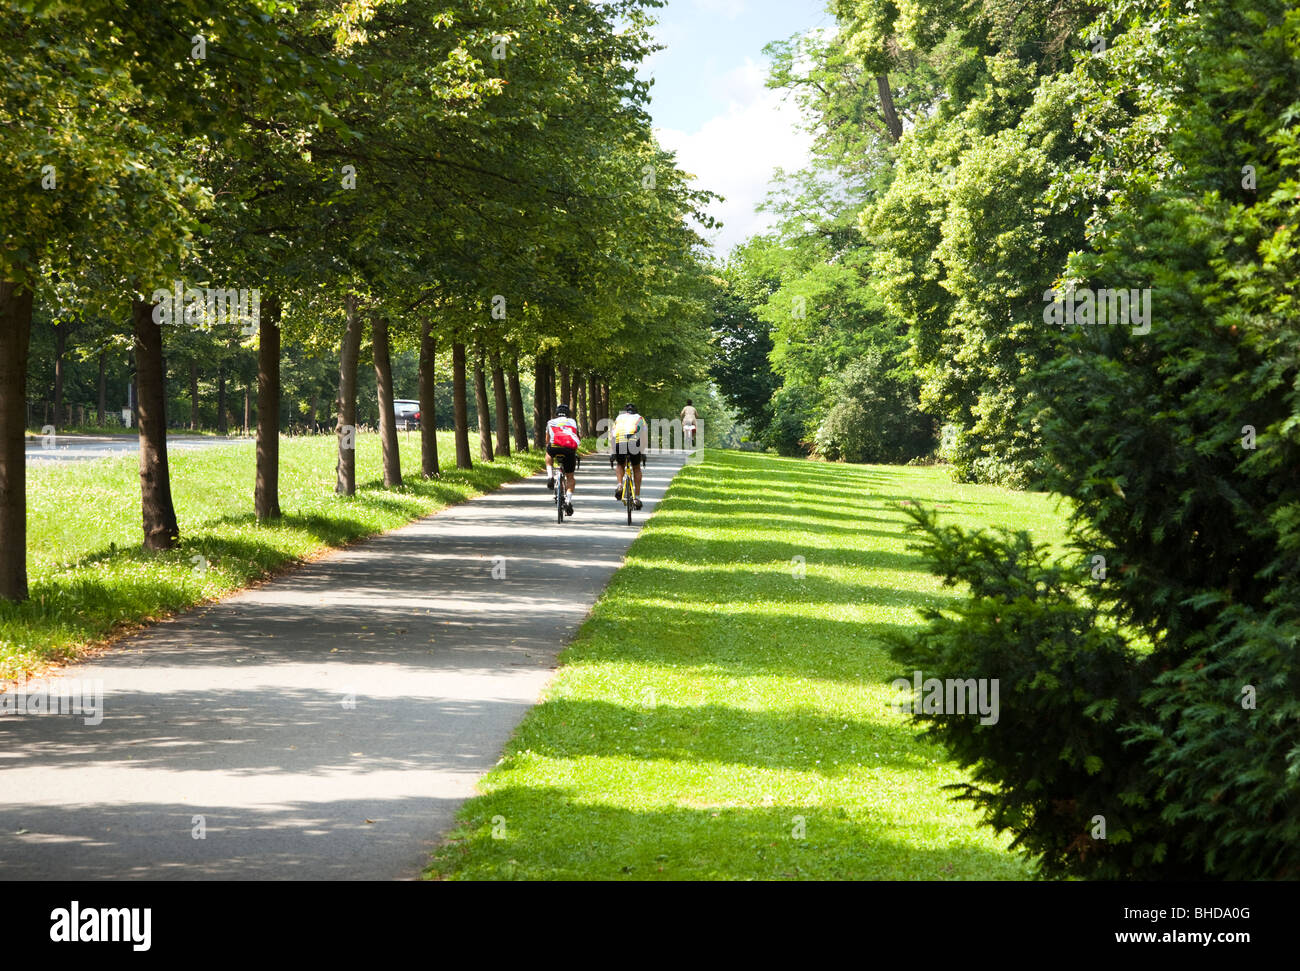 Cyclists riding on a cycle path on the edge of the city park in Weimar, Germany, Europe Stock Photo